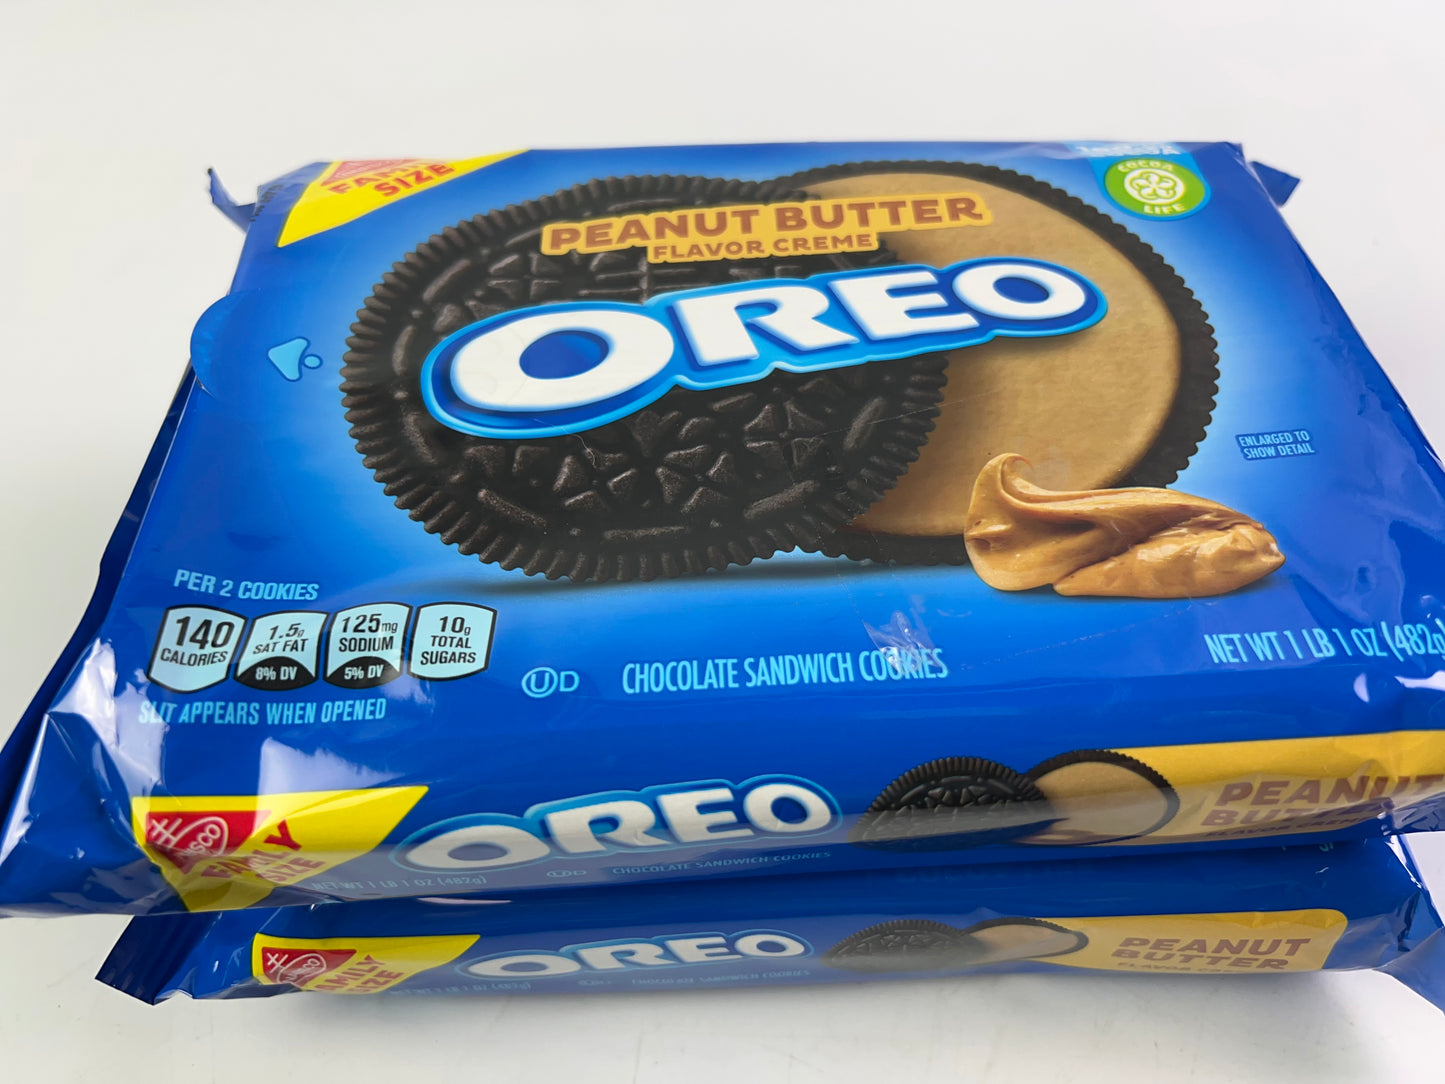 OREO Peanut Butter Creme Chocolate Sandwich Cookies, Family Size, 17 oz 2-Pack